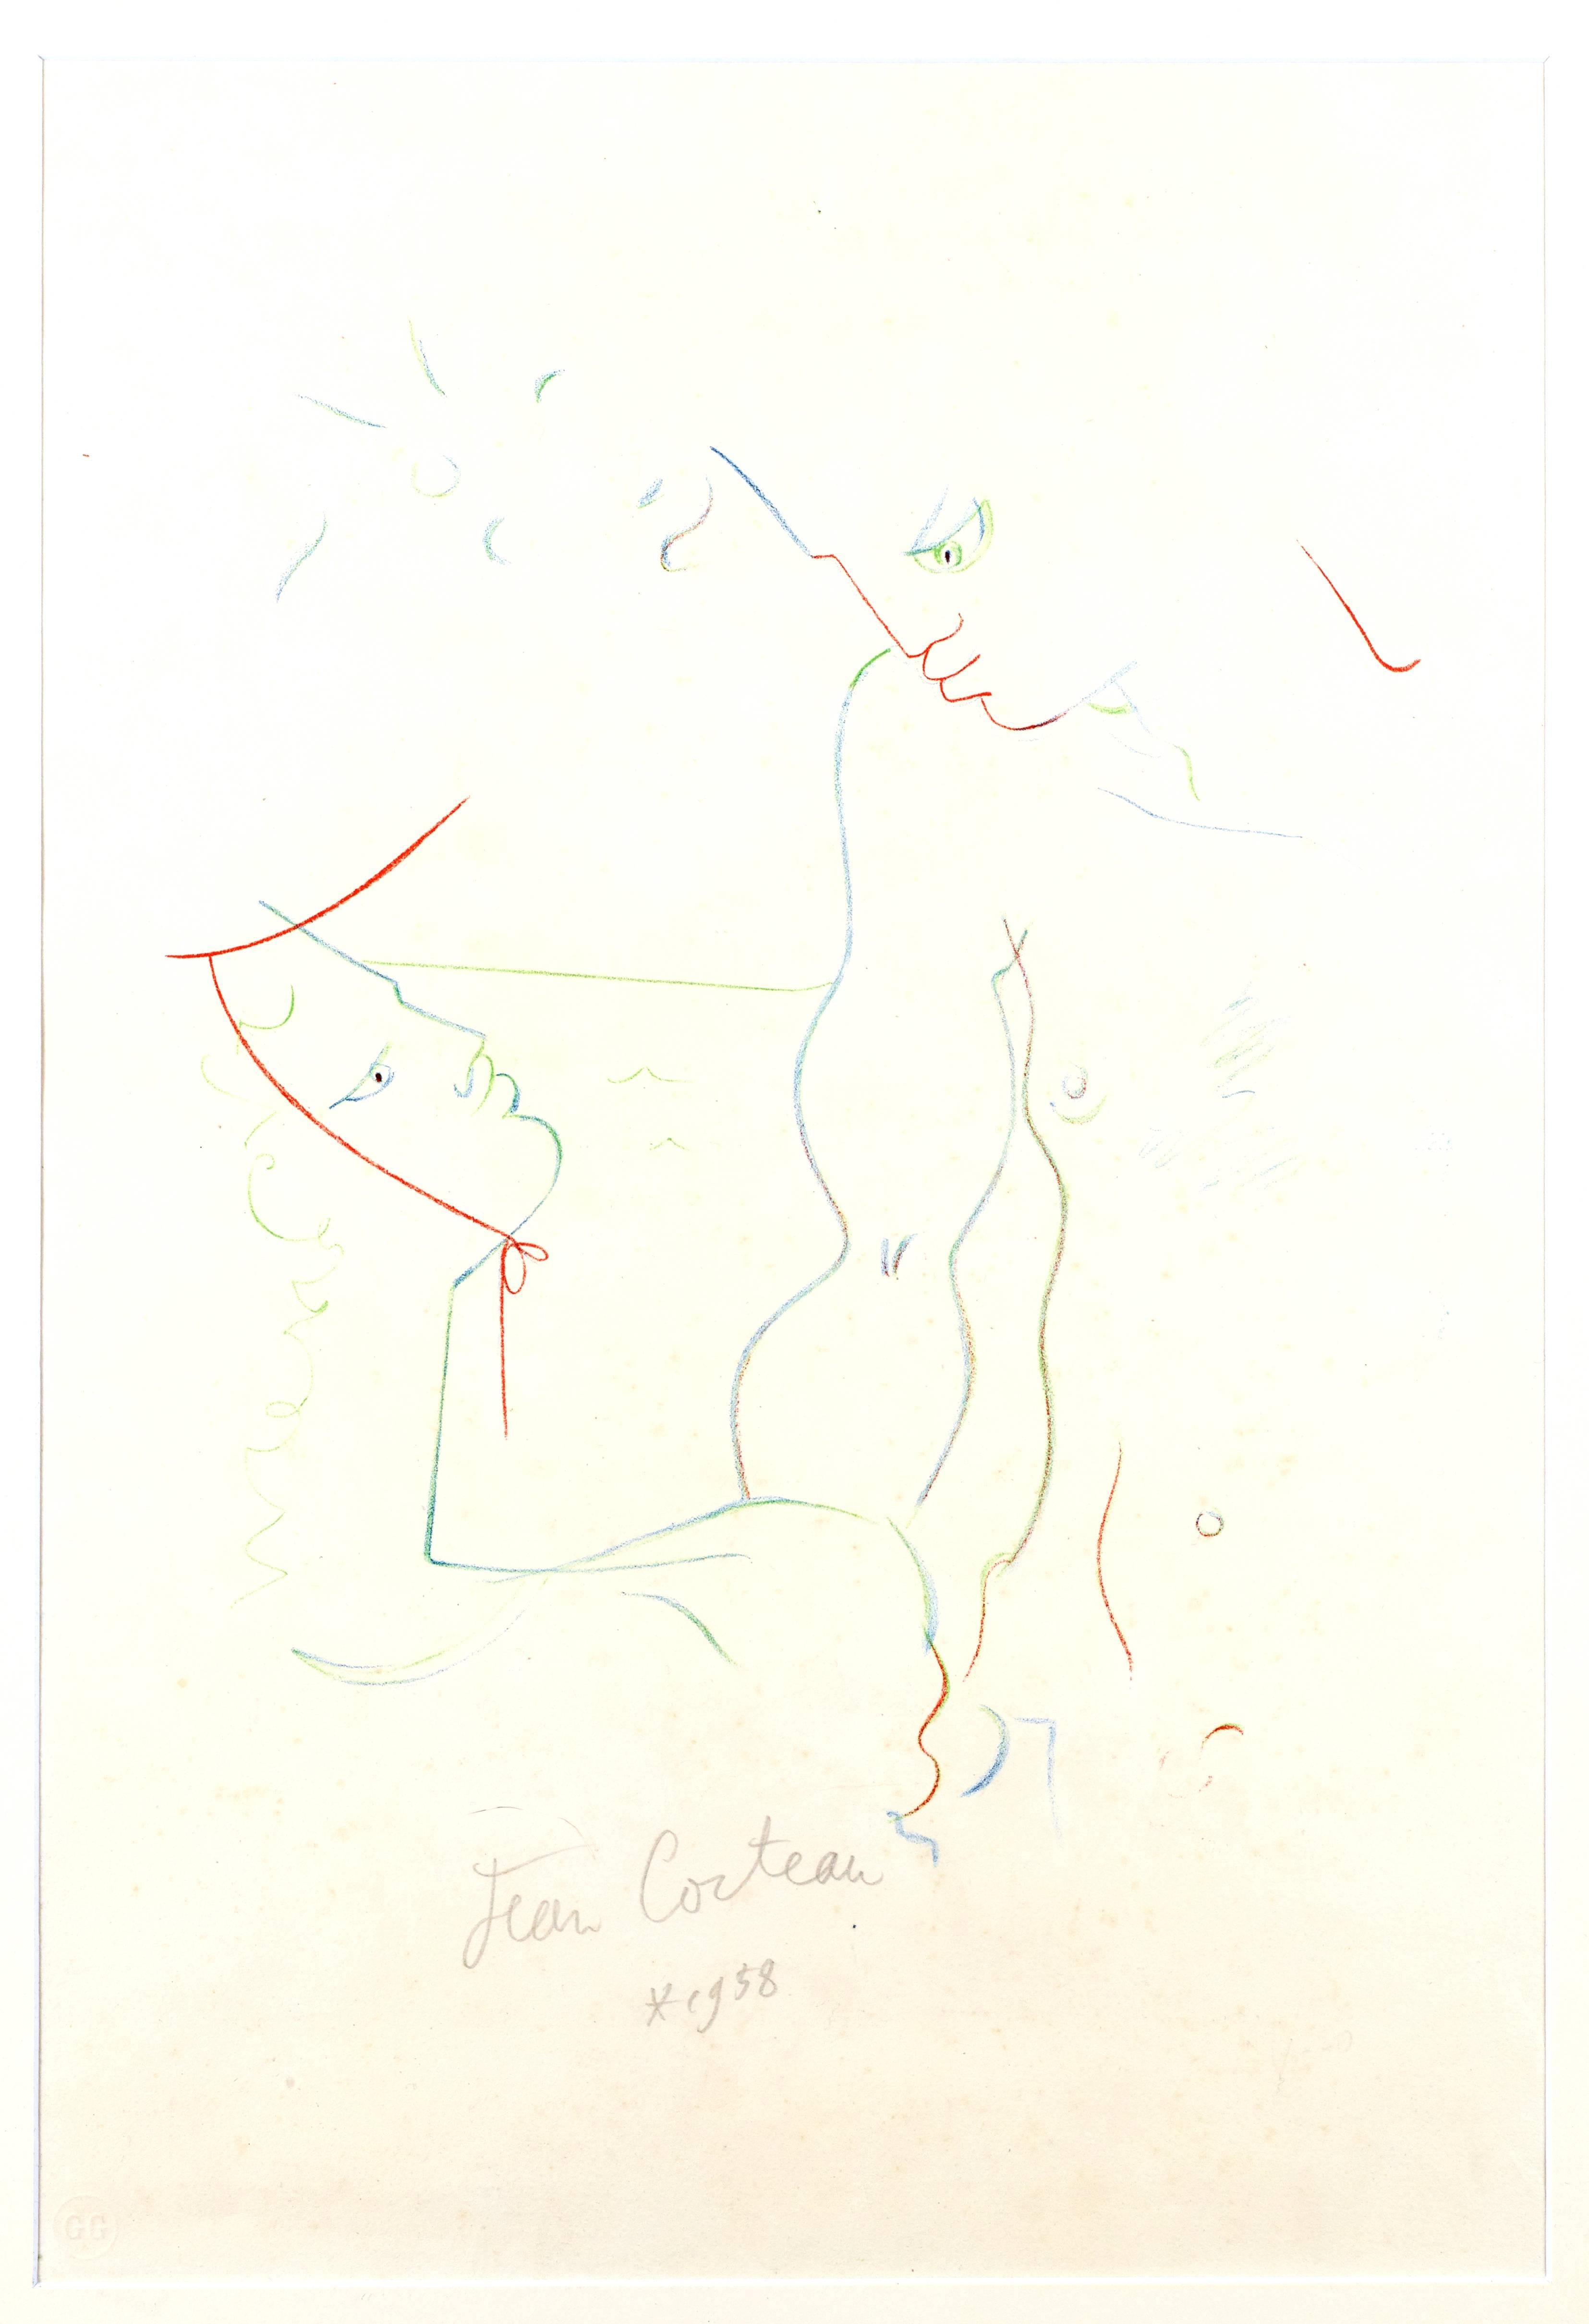 JEAN COCTEAU (1889-1963)
Under the Sun of Menton
1958
Handsigned Lithograph
Dimensions: 57,5 x 38,5 cm

Jean Cocteau

Writer, artist and film director Jean Cocteau was one of the most influential creative figures in the Parisian avant-garde between